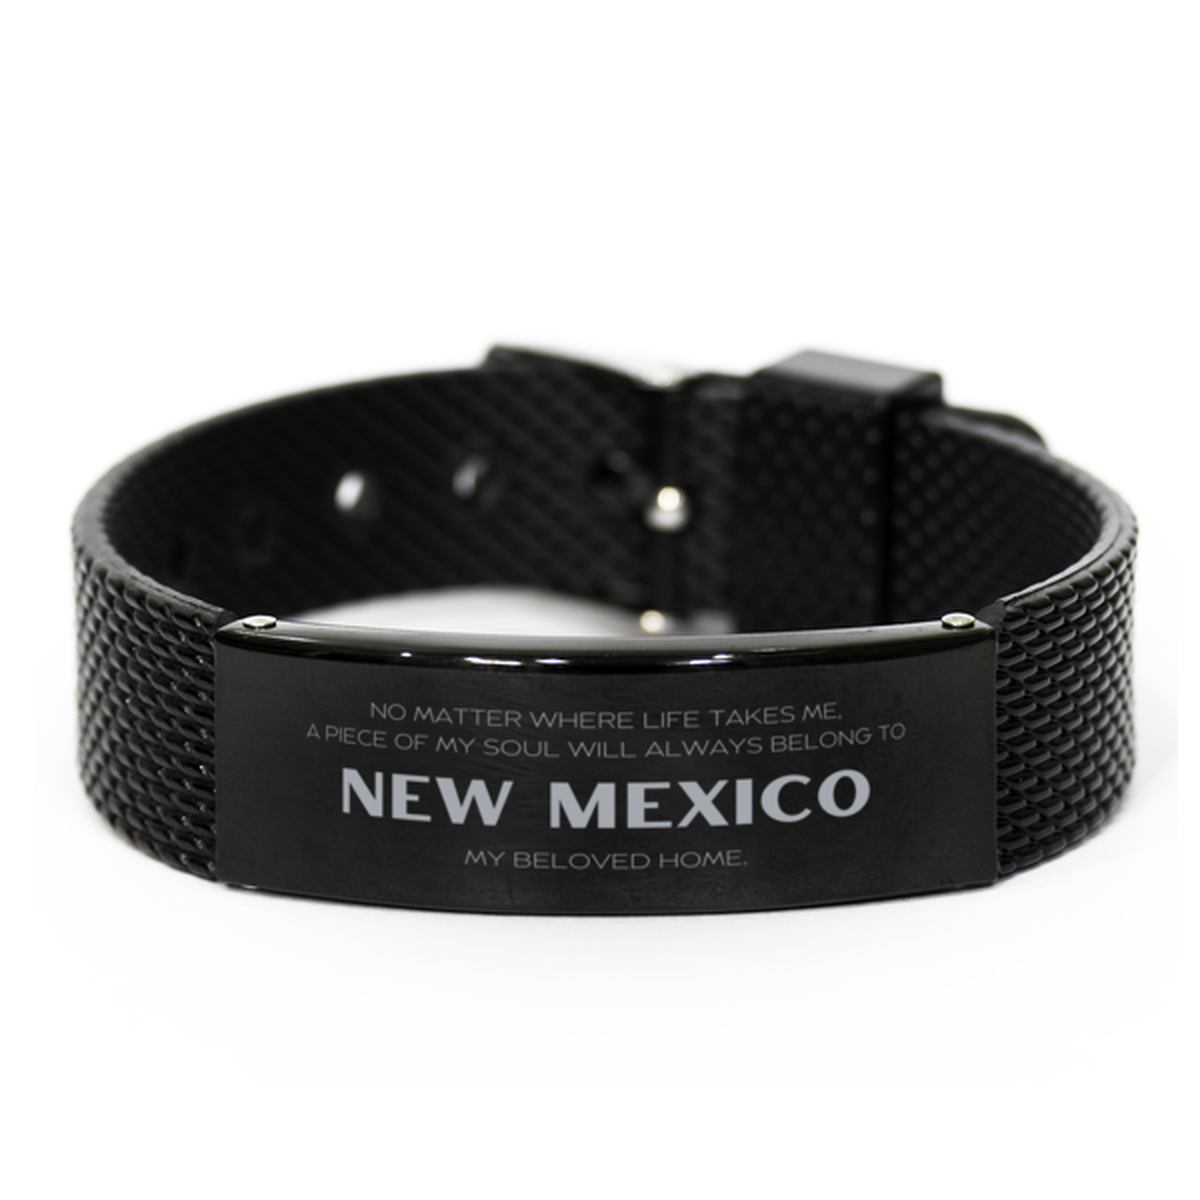 Love New Mexico State Gifts, My soul will always belong to New Mexico, Proud Black Shark Mesh Bracelet, Birthday Unique Gifts For New Mexico Men, Women, Friends